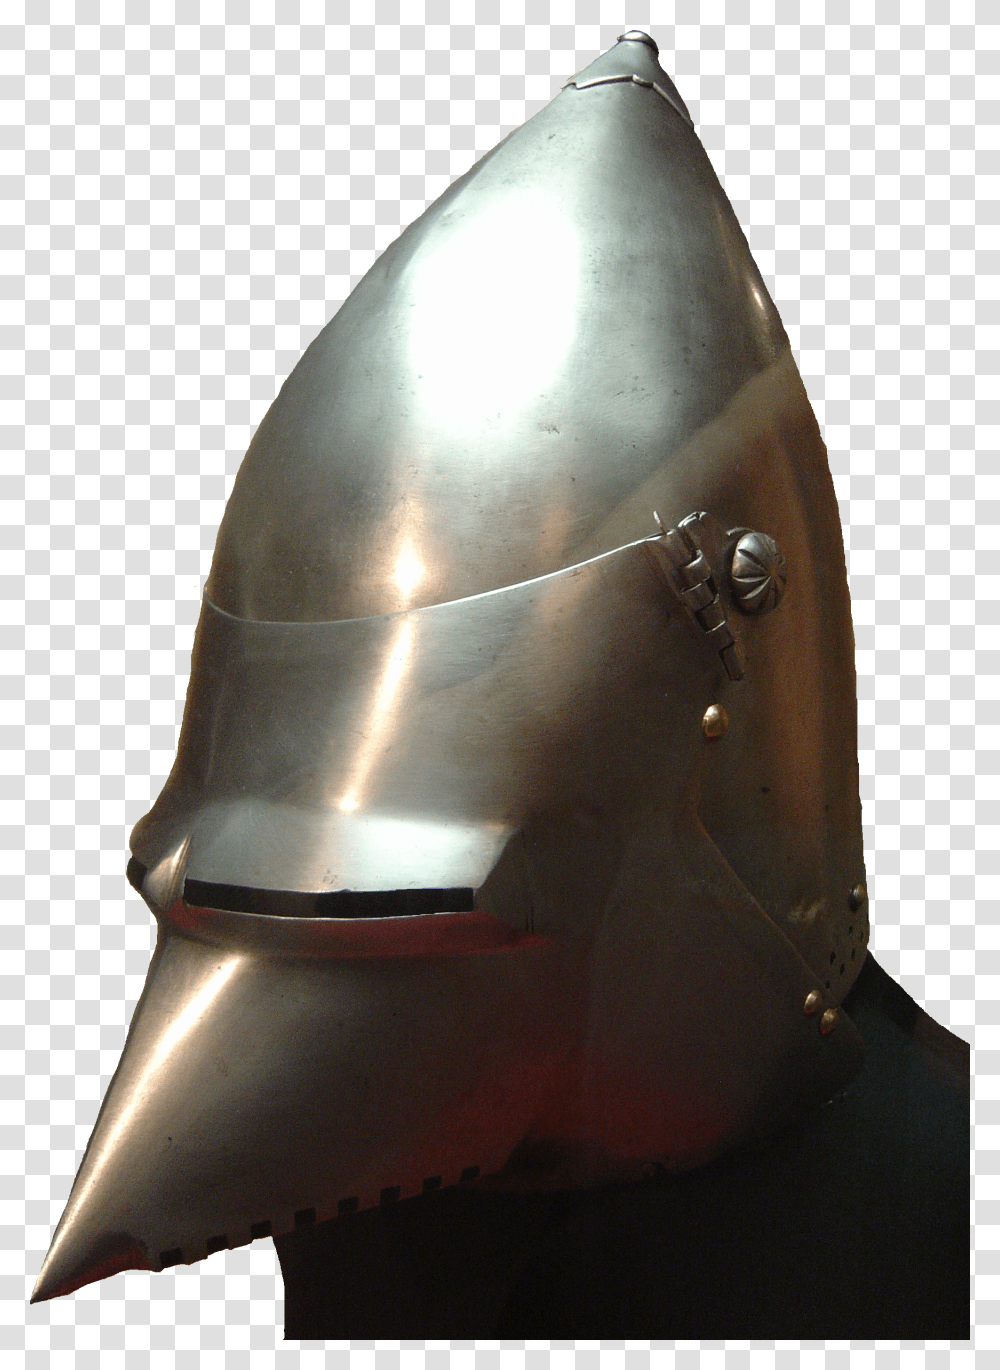 Helm Head With Armored Helmet Transparent Png